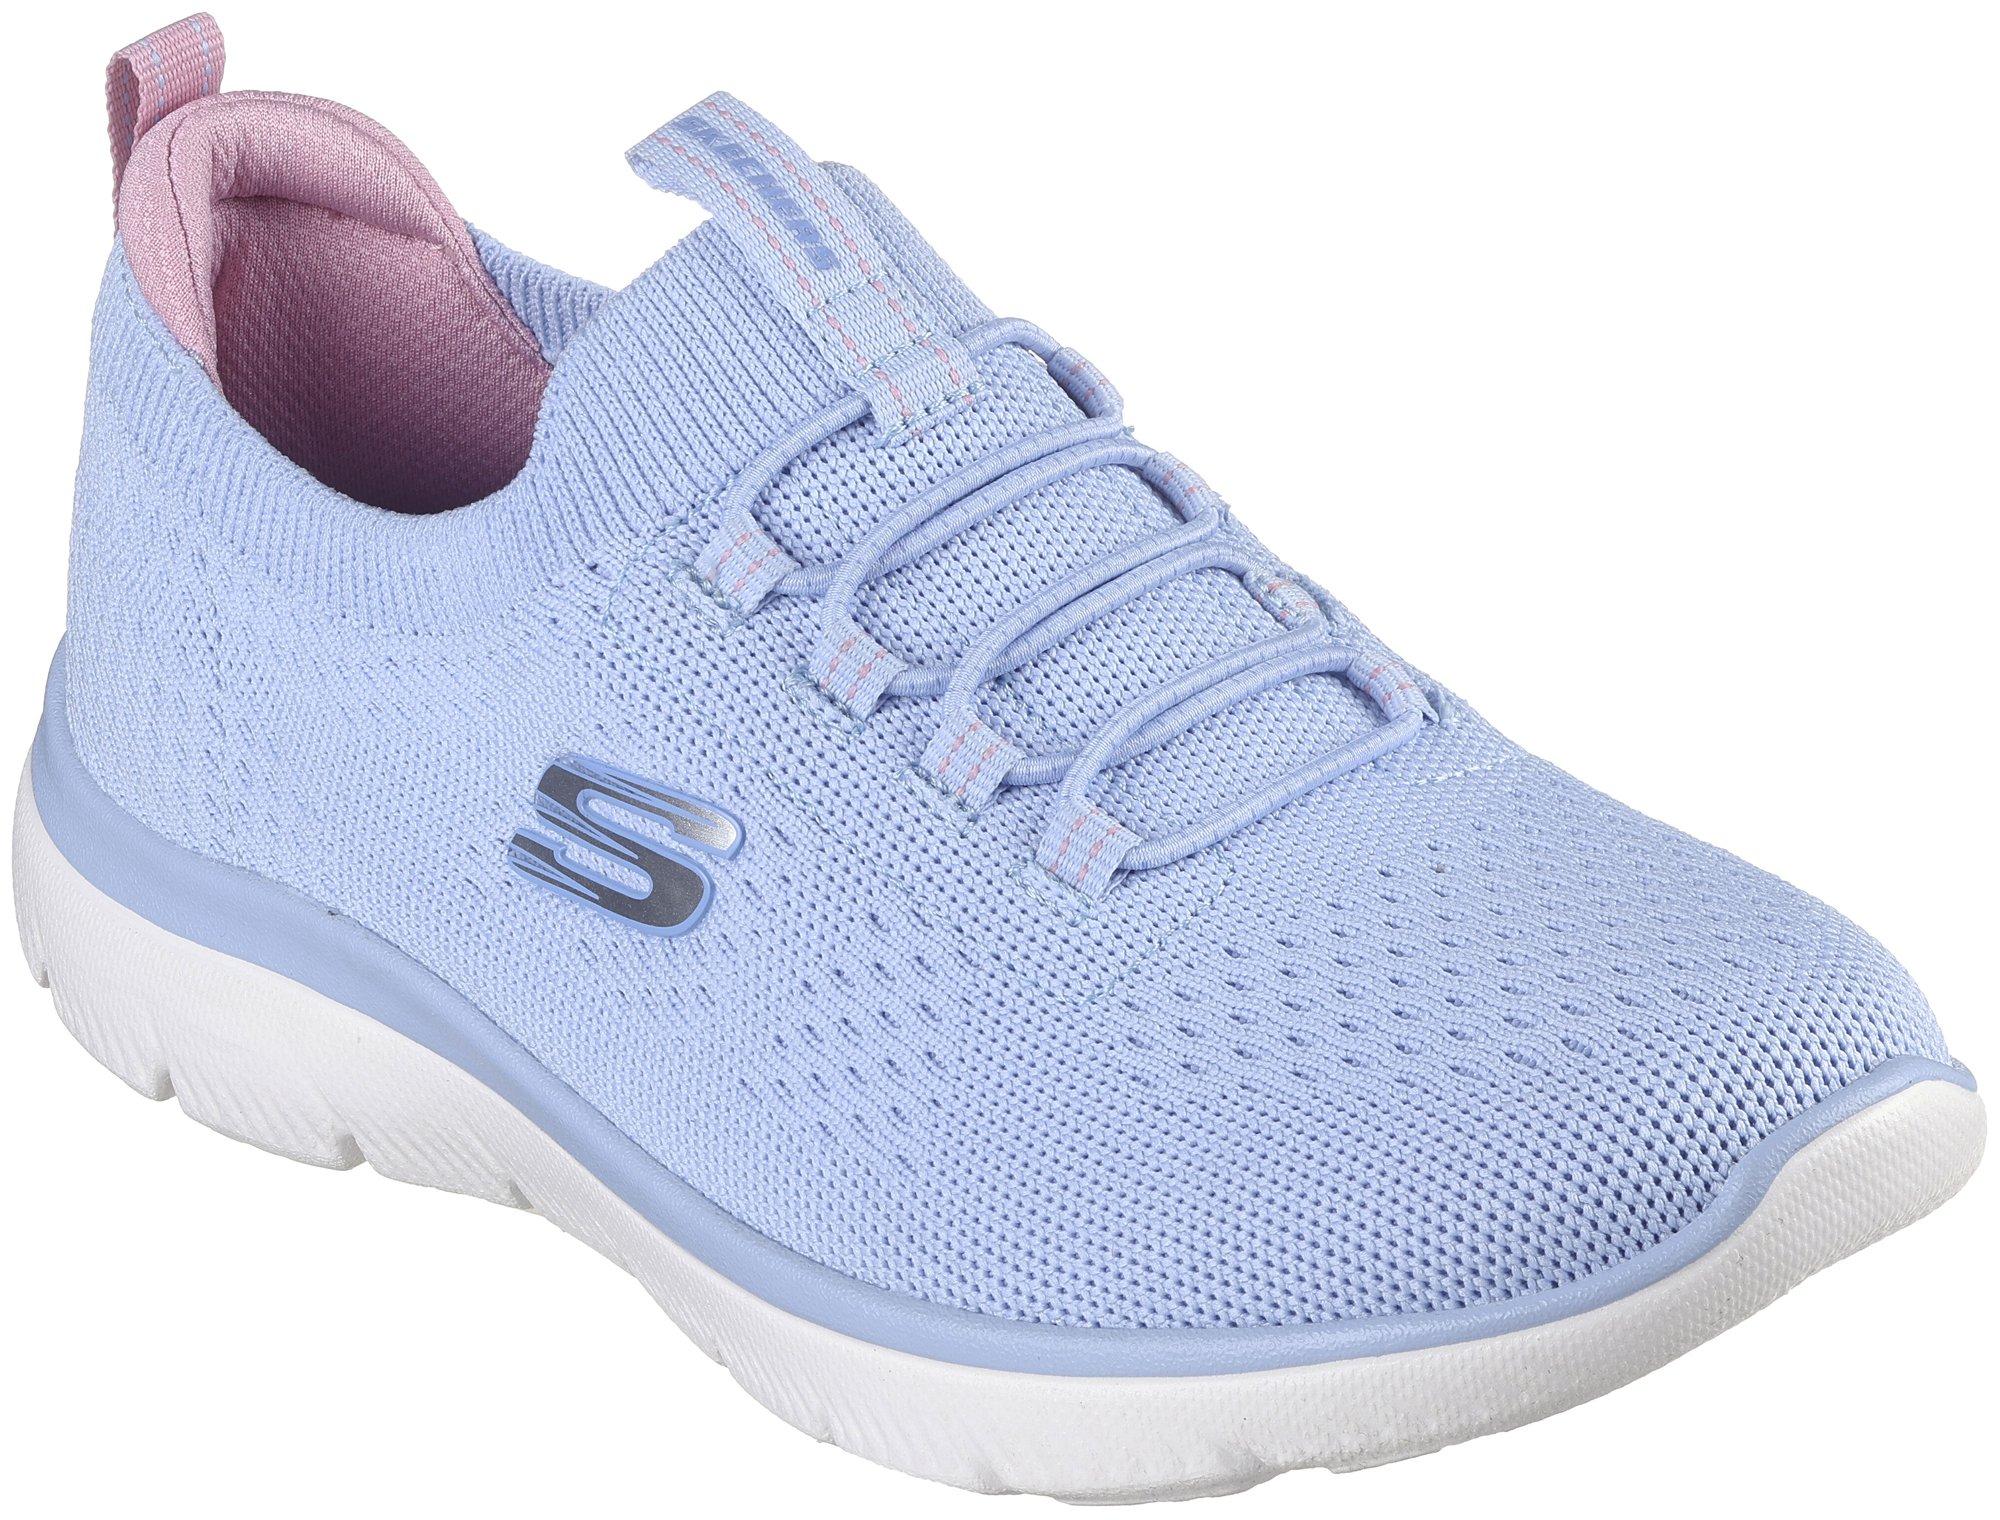 Womens Summits Top Player Athletic Shoes